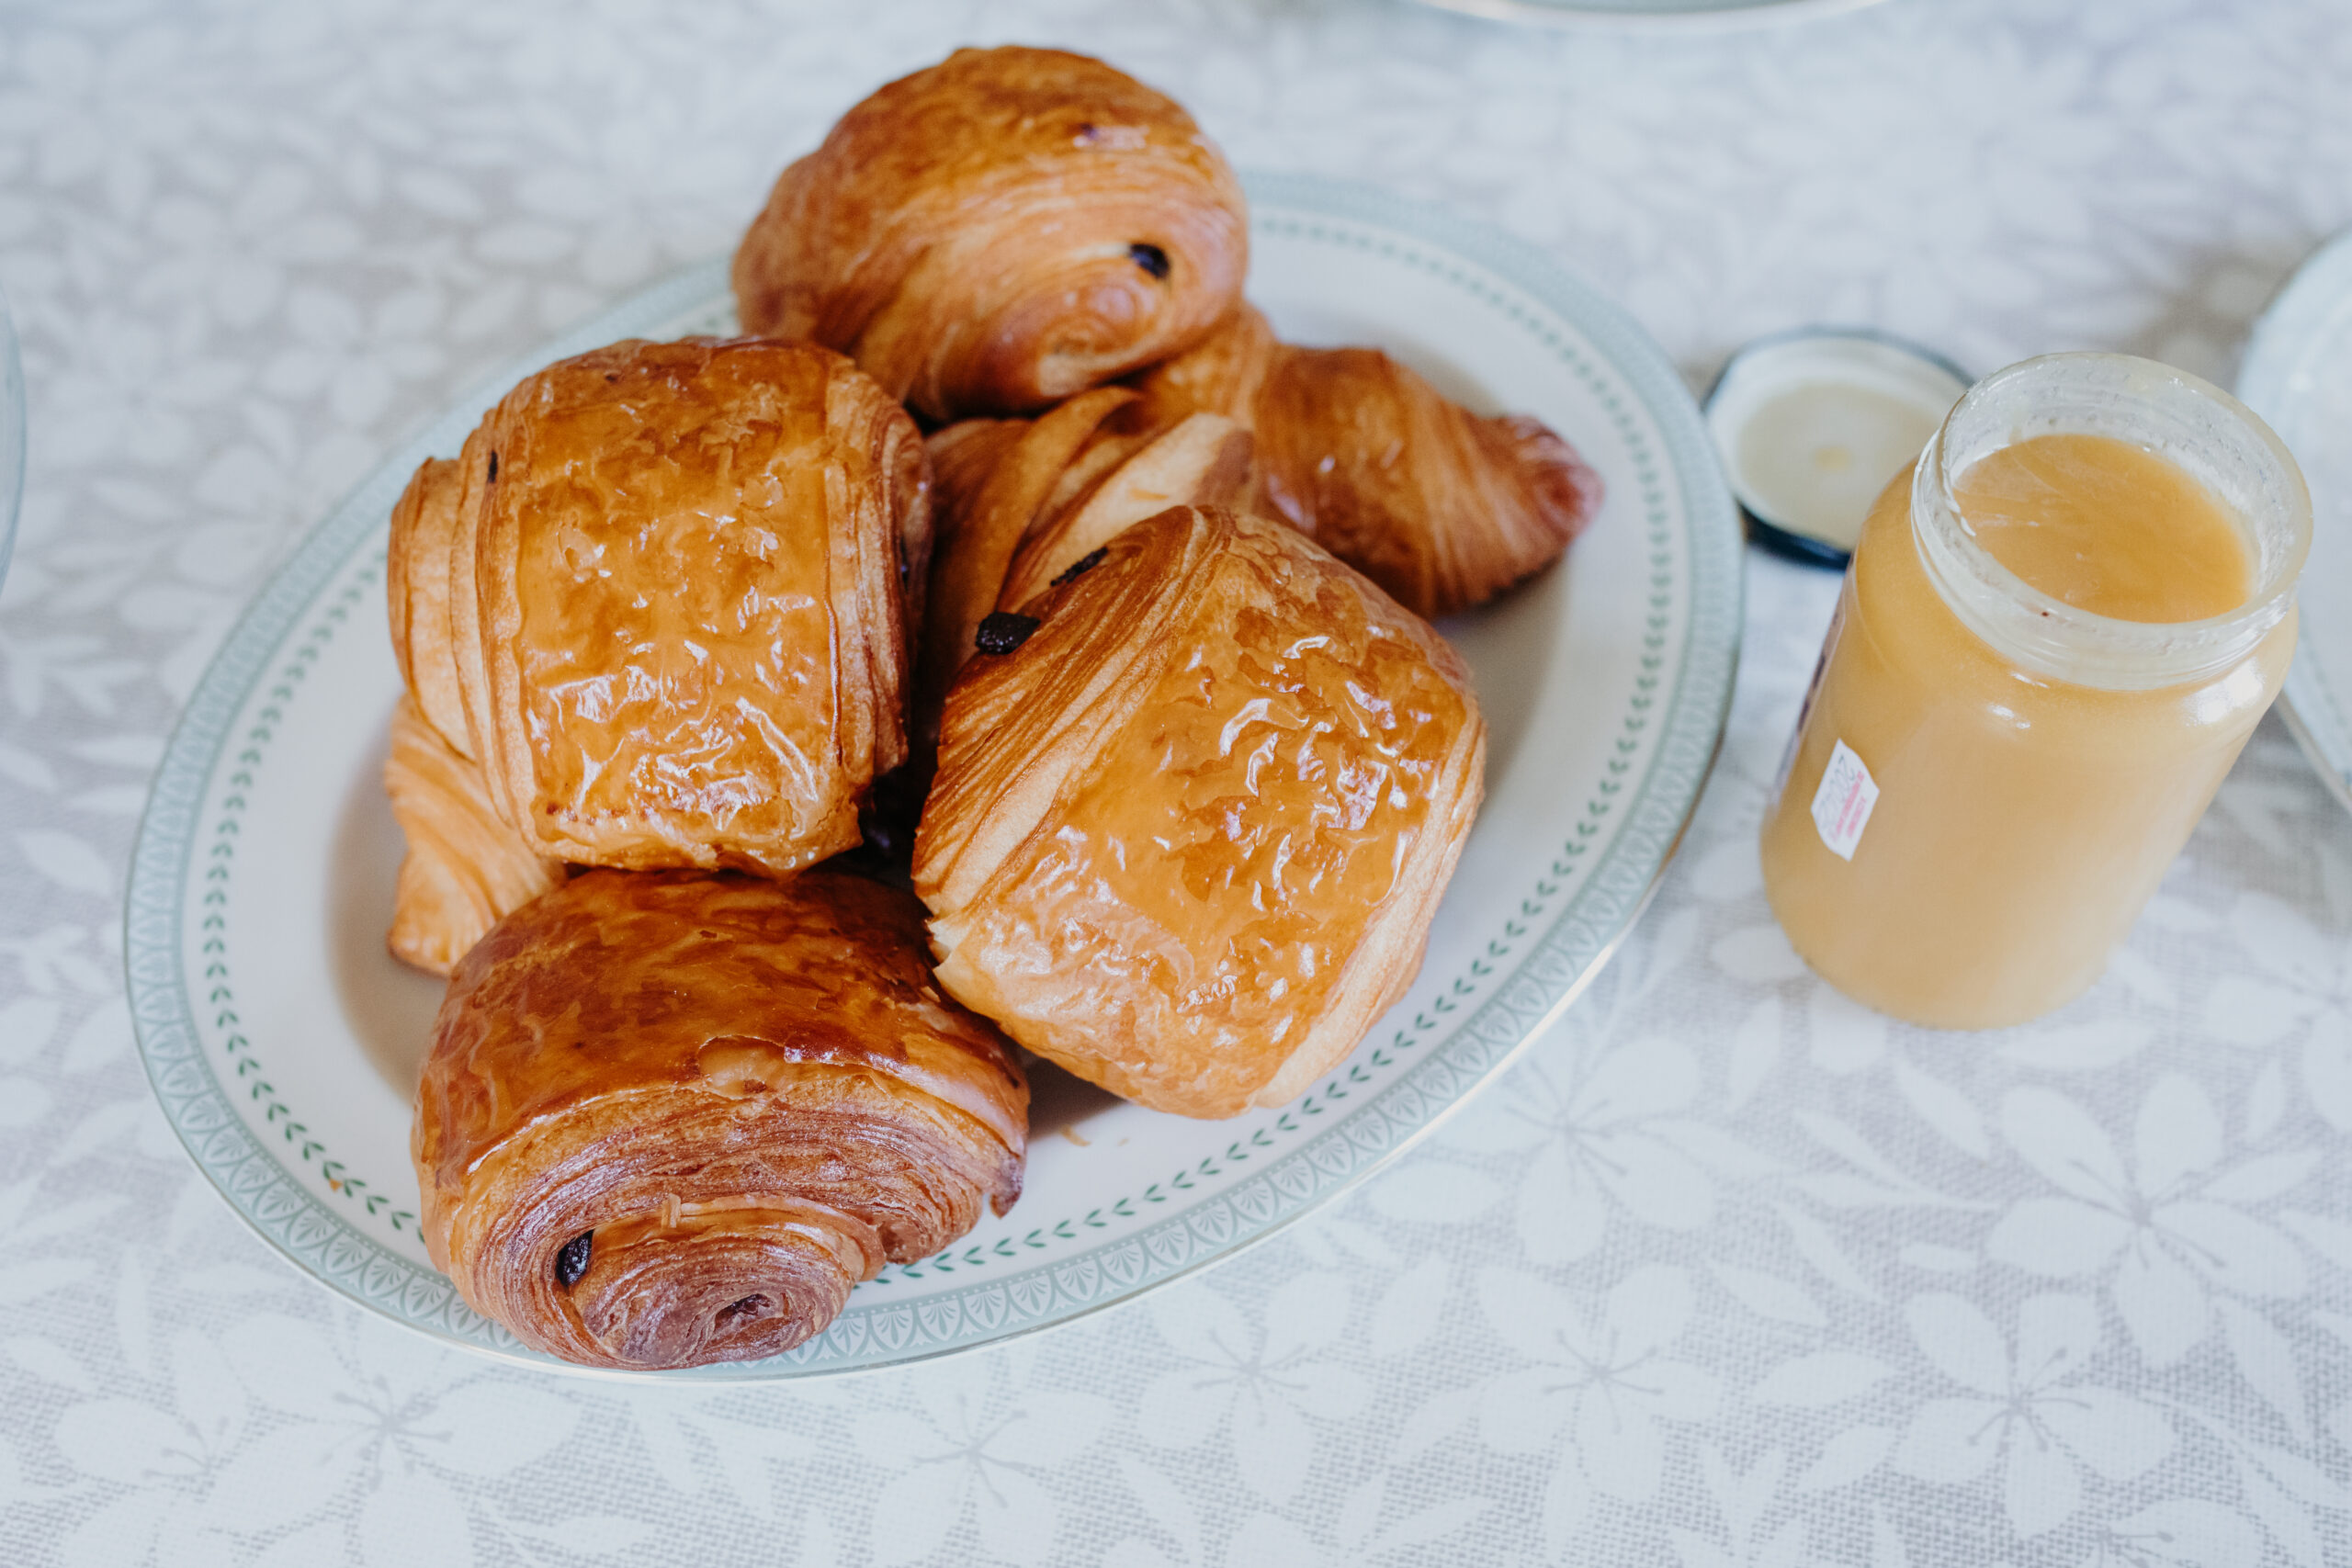 Chocolate croissants sit on a white plate on a table with a white tablecloth and orange jam to the right. 